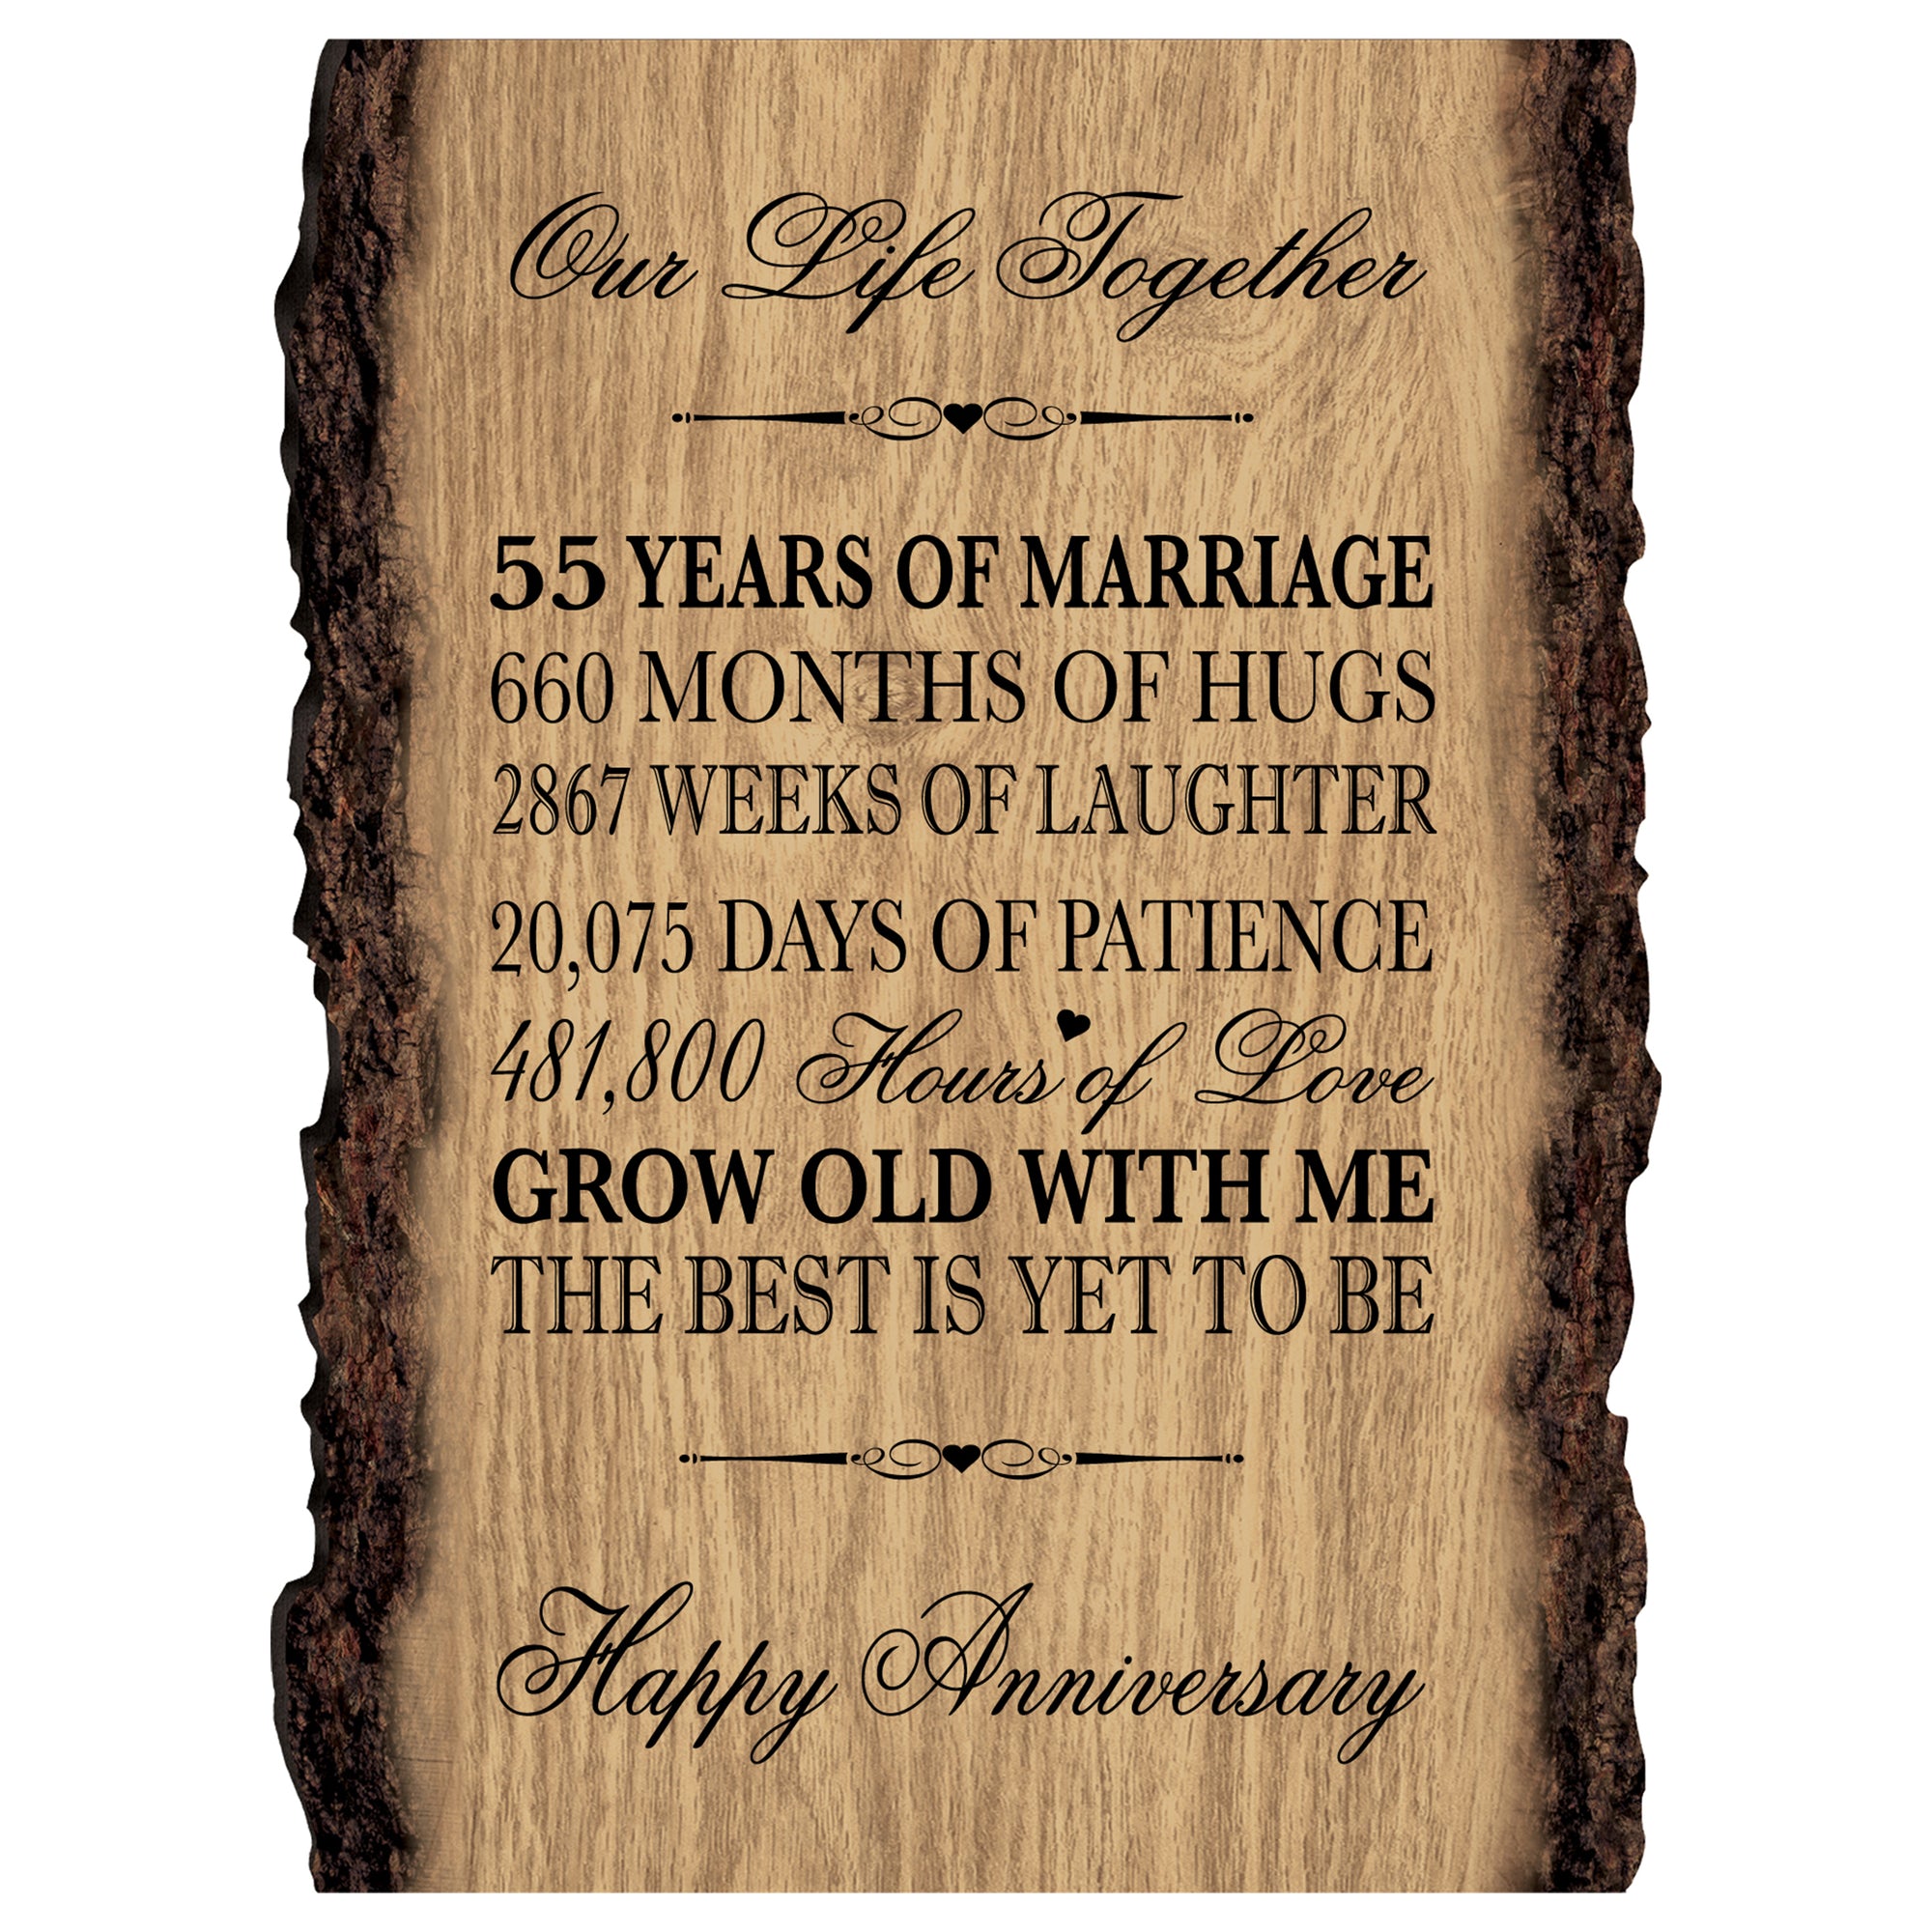 Rustic Wedding Anniversary 9x12 Barky Wall Plaque Gift For Parents, Grandparents New Couple - 55 Years Of Marriage